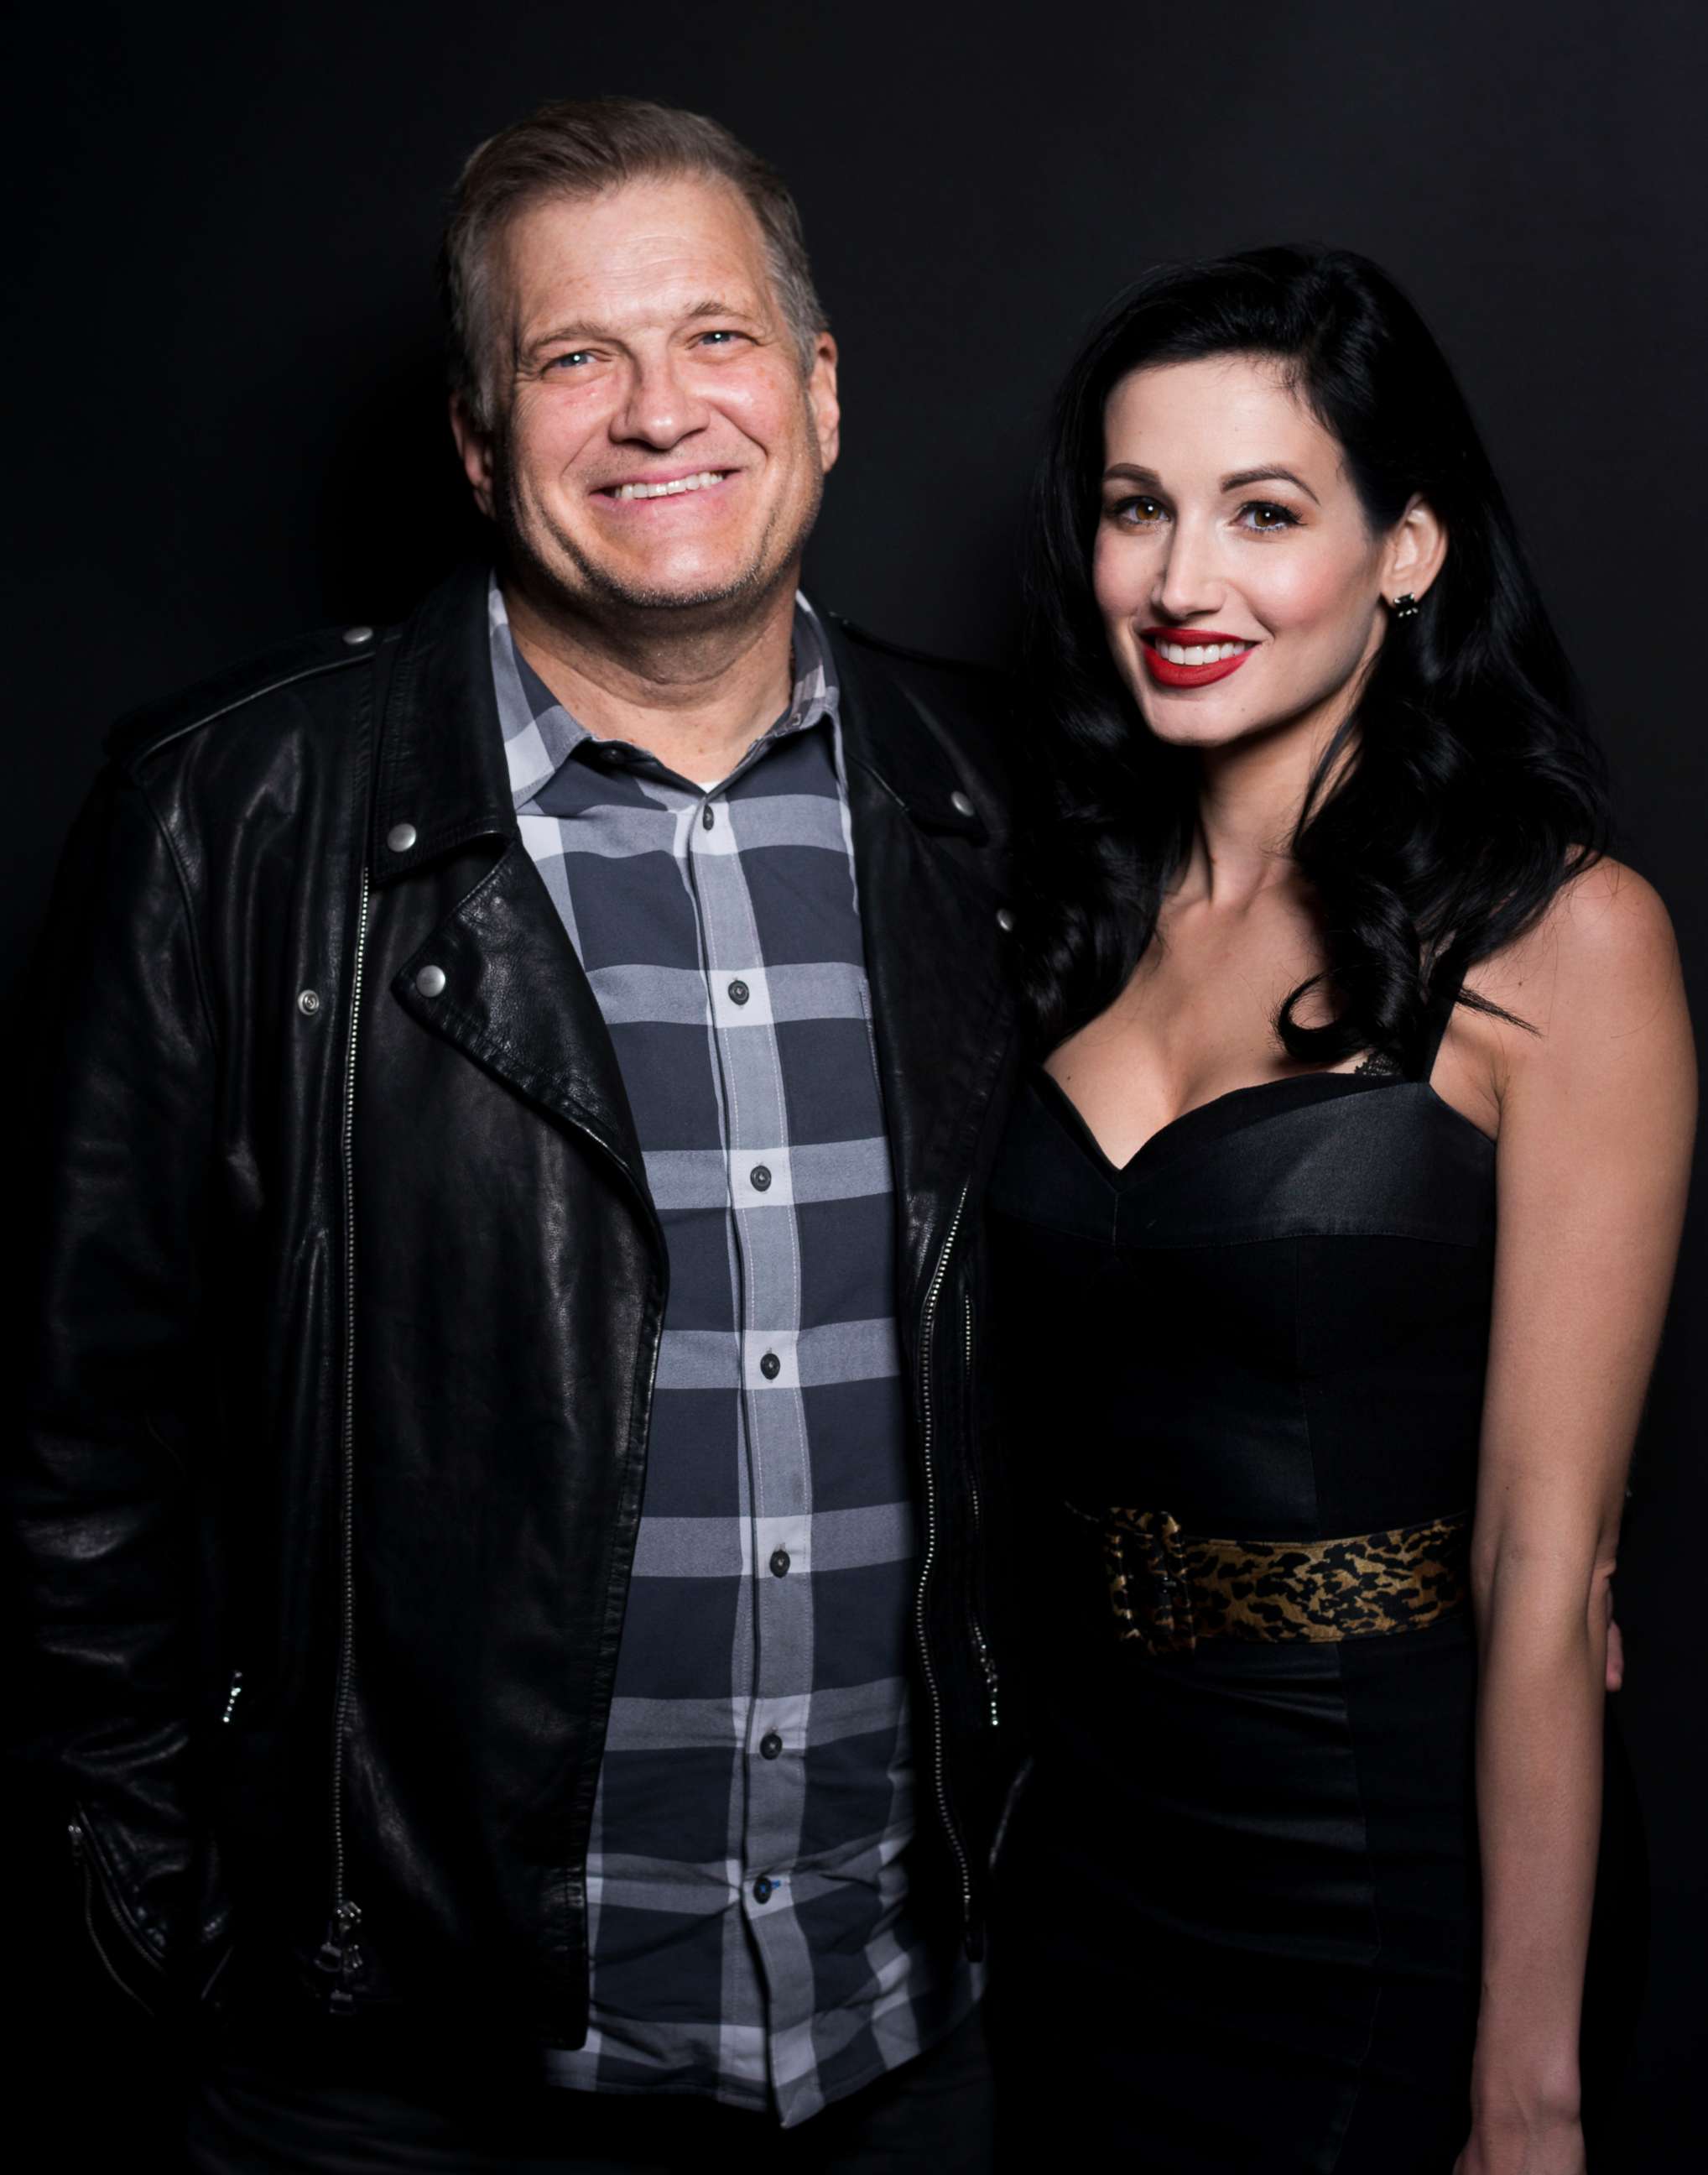 PHOTO: Drew Carey and Amie Harwick pose for The Artists Project, Dec. 17, 2017, in Hollywood, Calif.  